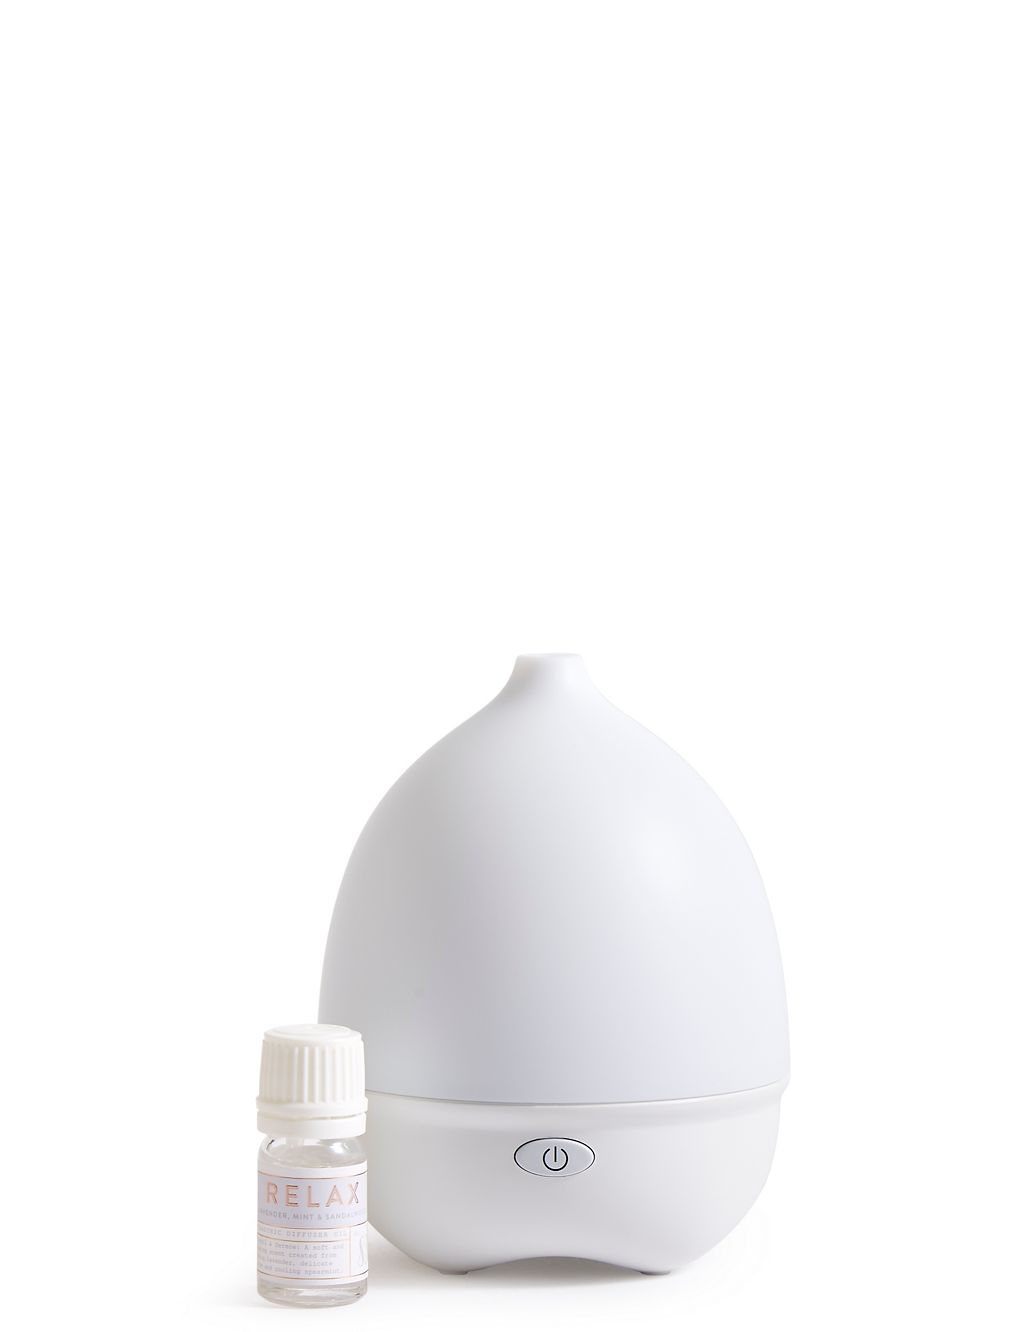 Relax Ultrasonic Diffuser Set 2 of 2